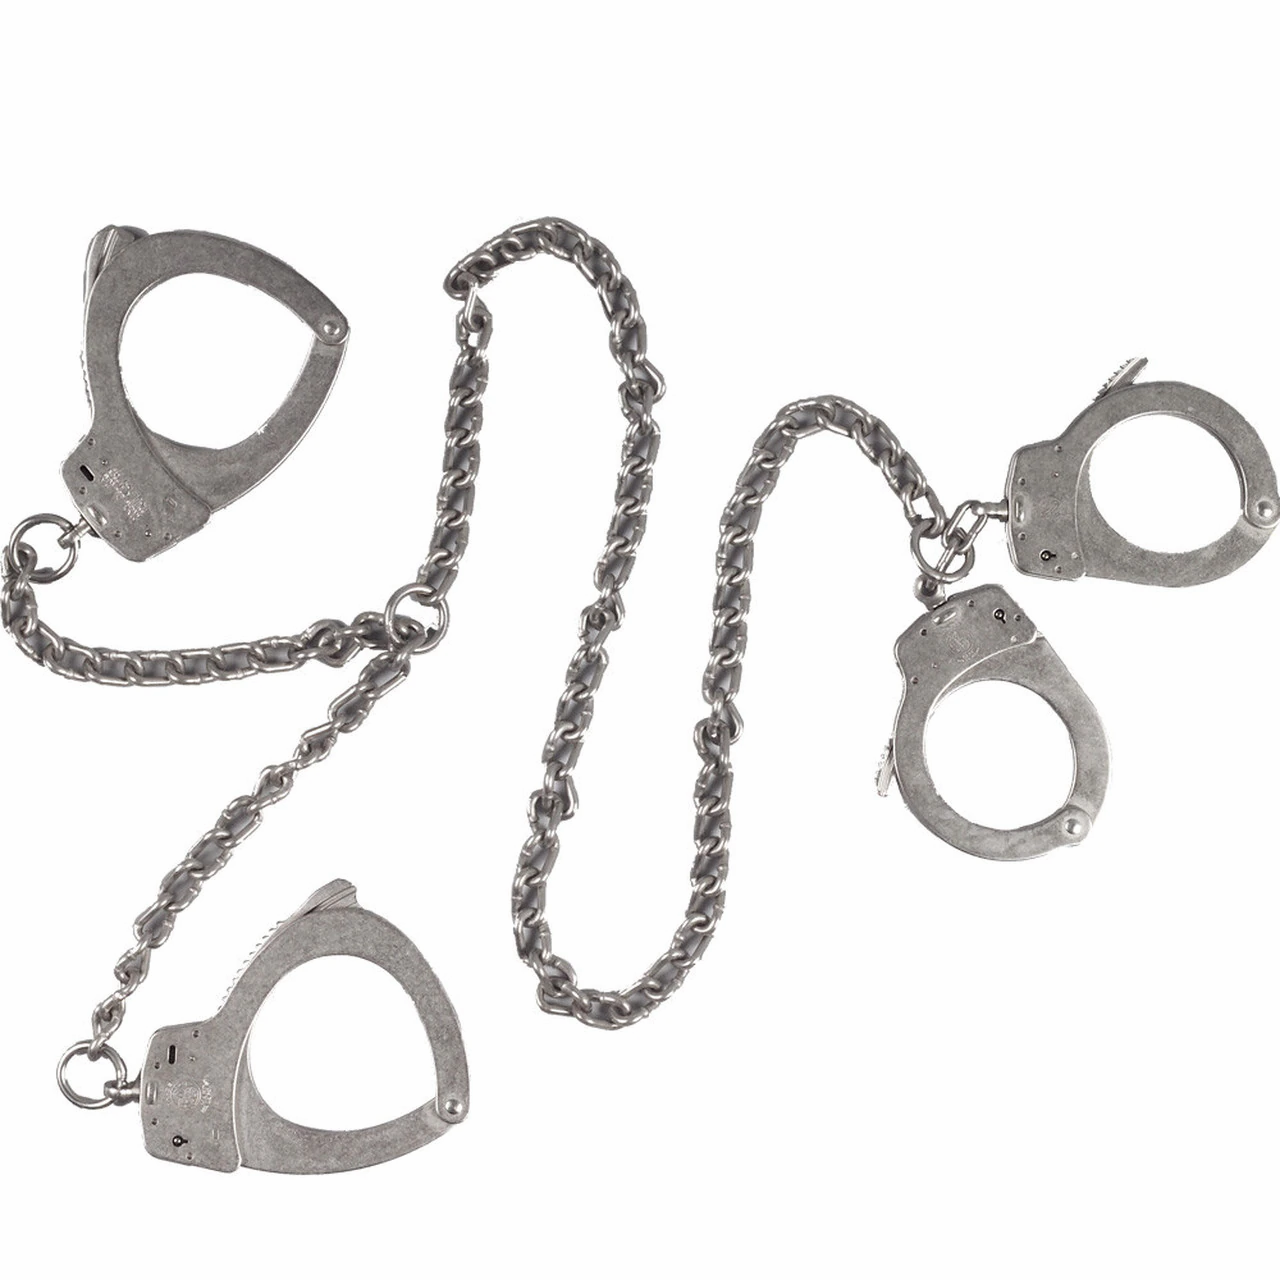 SMITH & WESSON CHAIN RESTRAINT